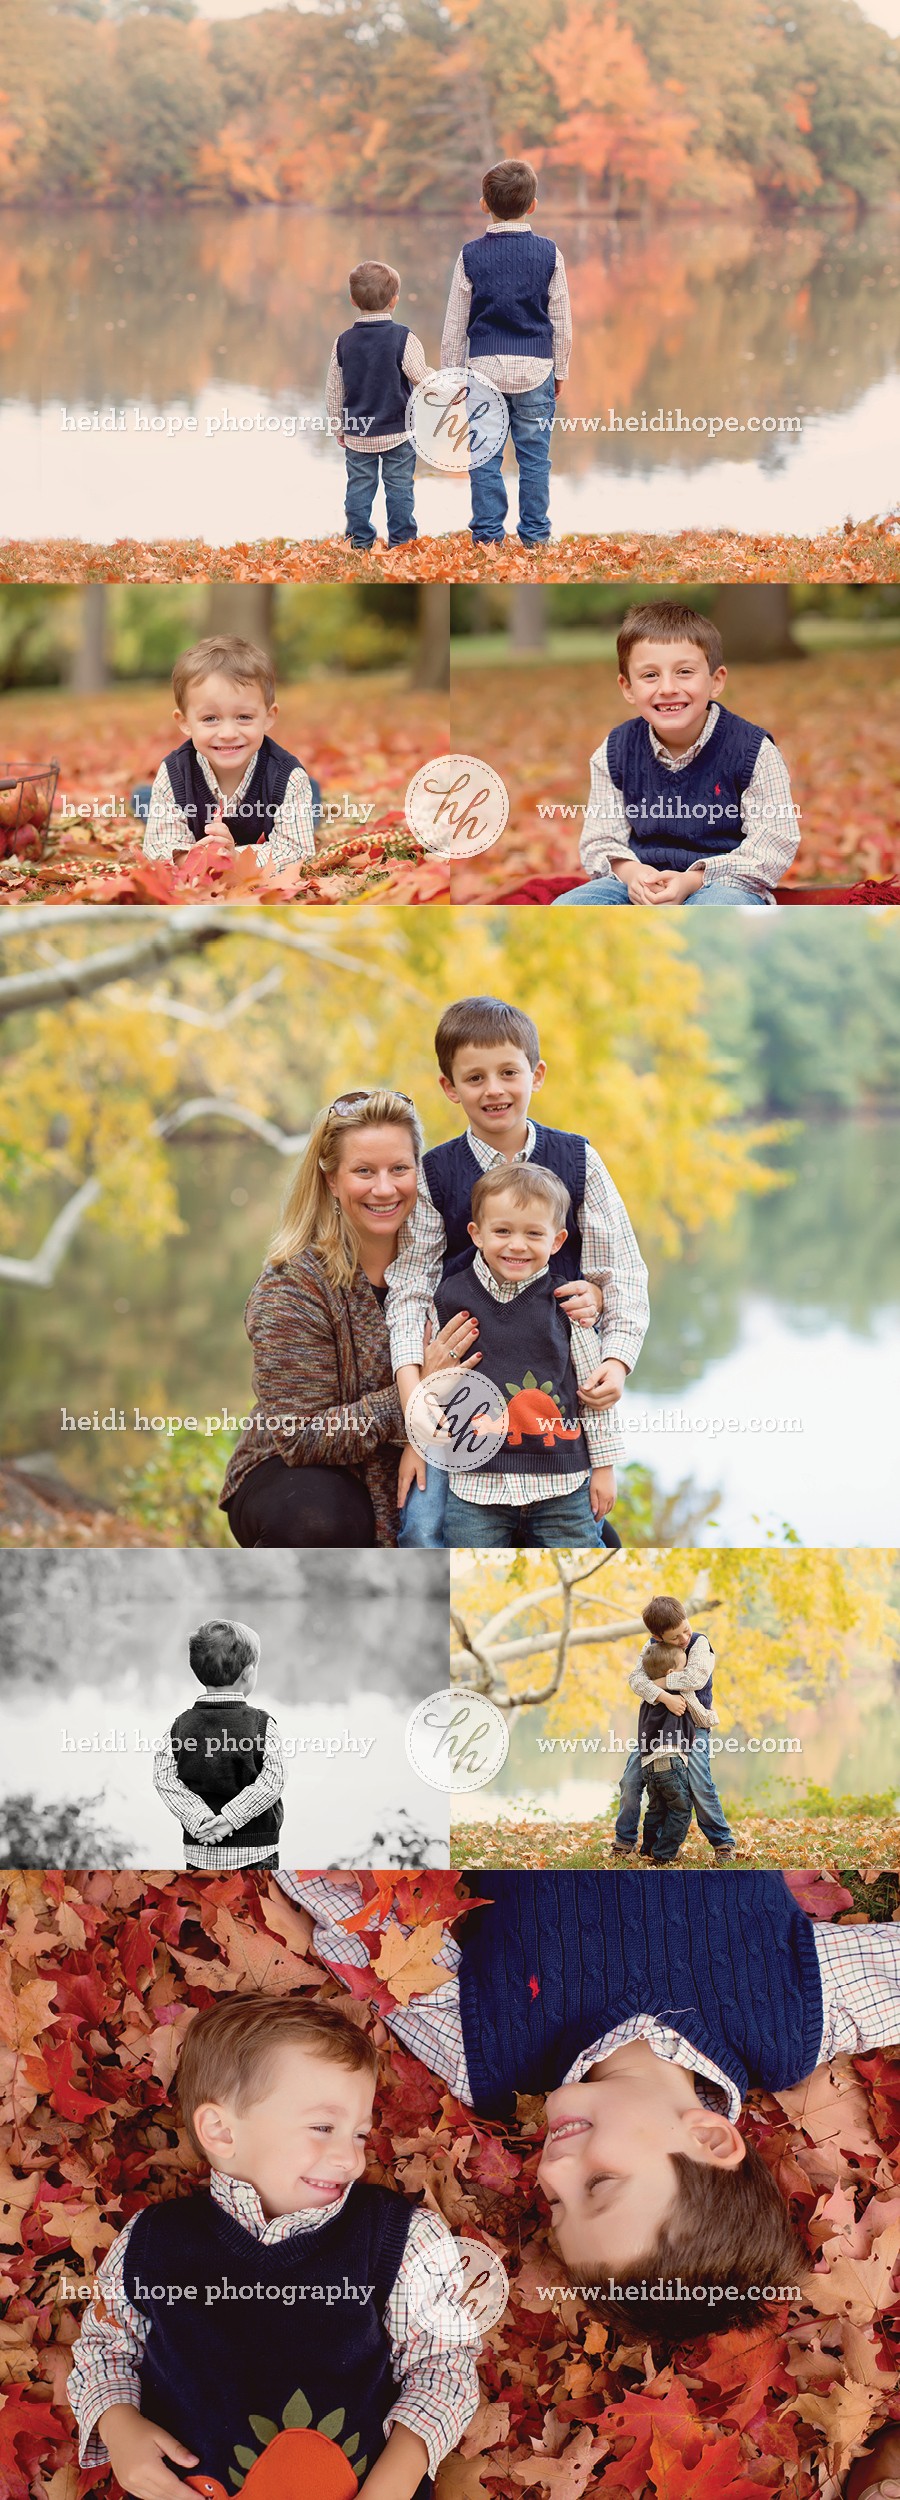 The N Family in the Fall Foliage!